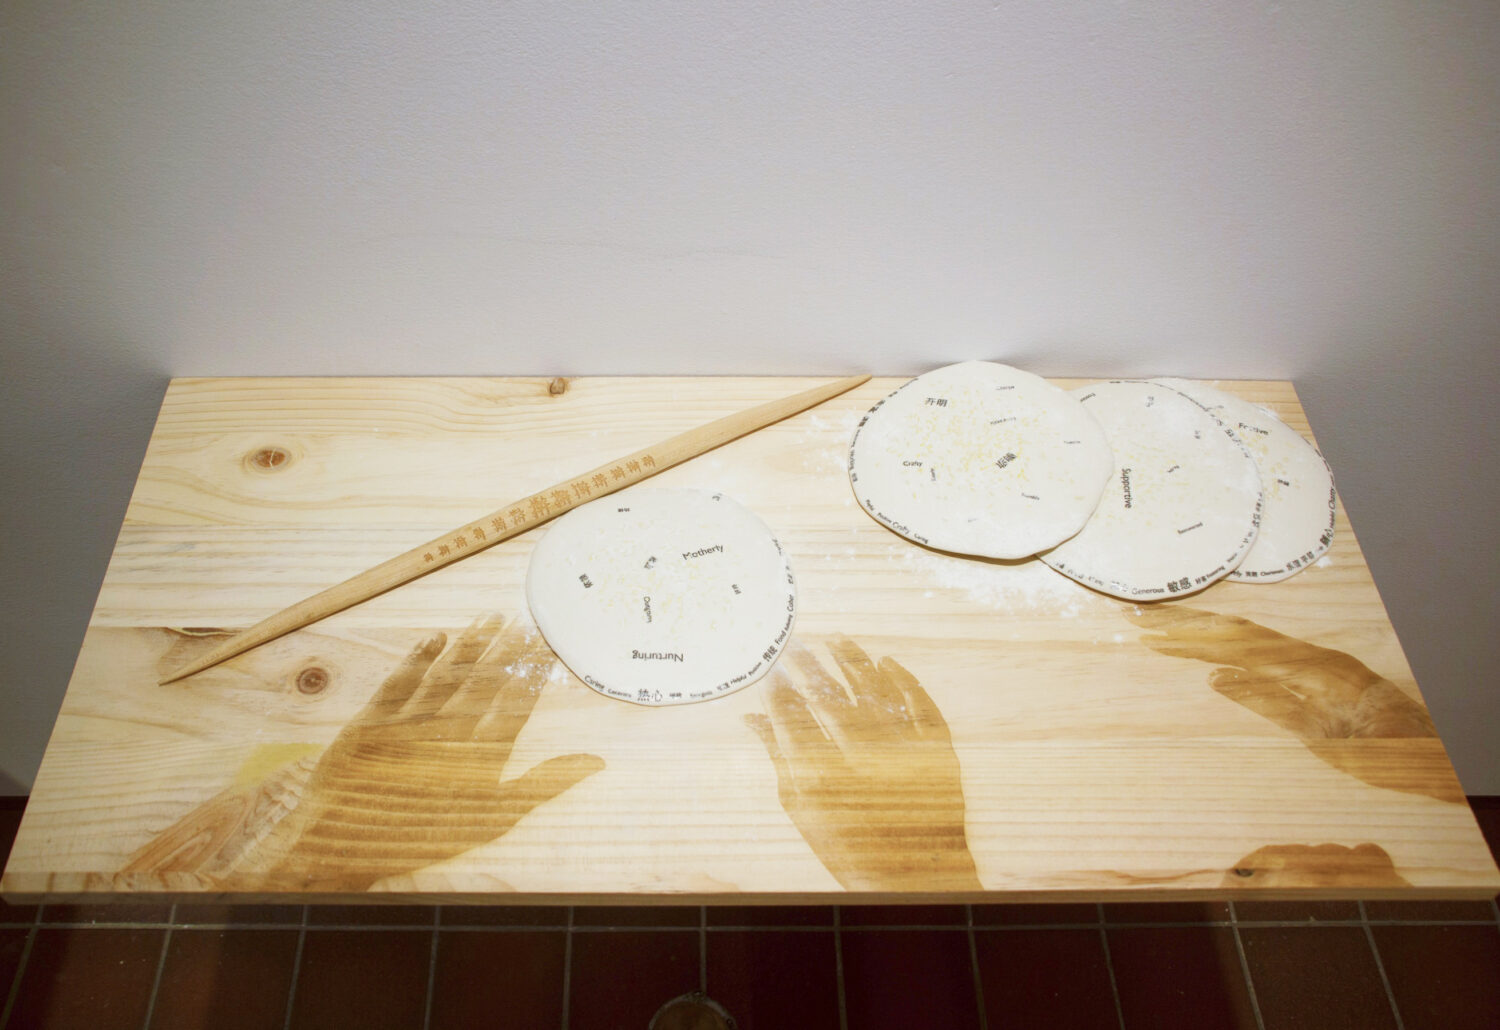 An art installation featuring a wood board with images of hands engraved on it, with flat round pieces of dough laid out on the surface.